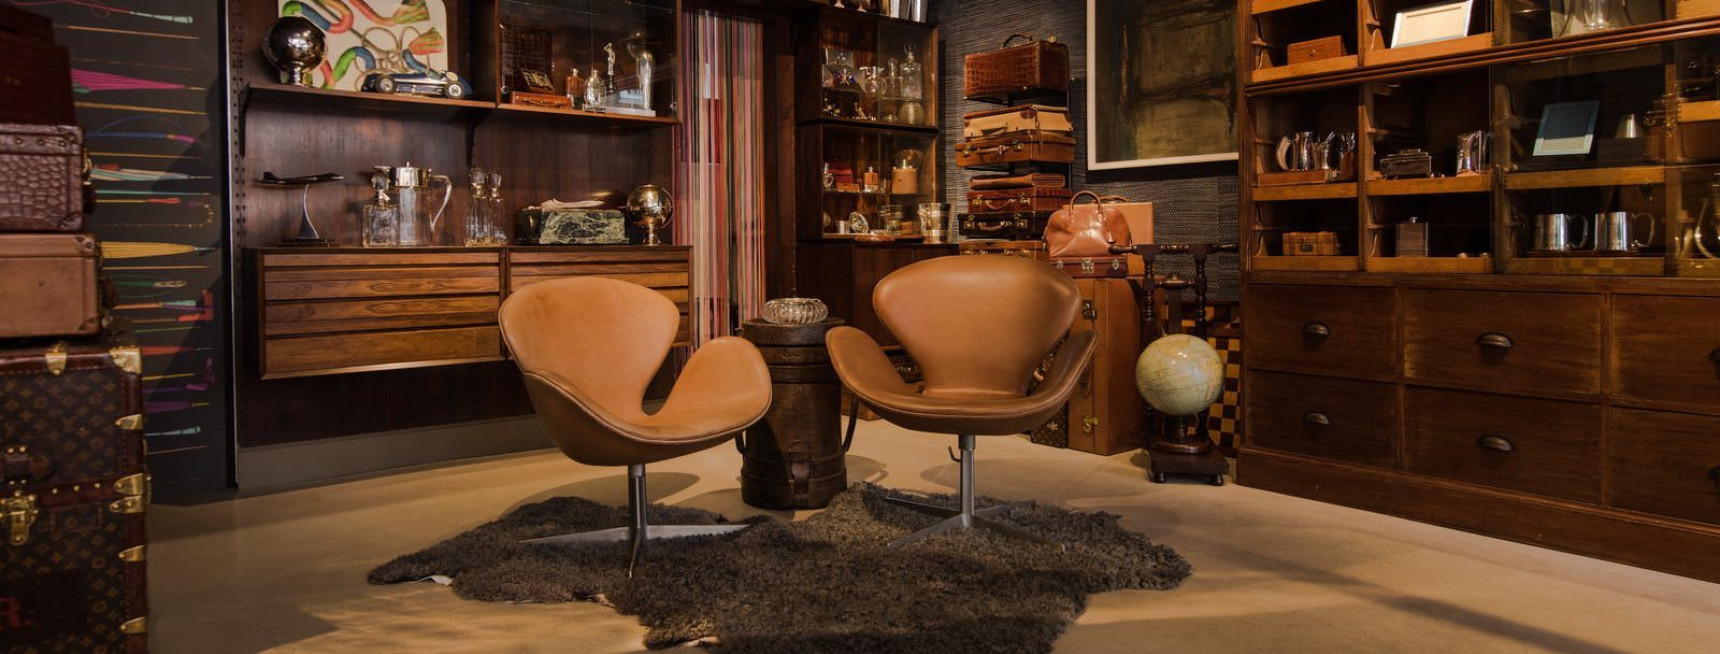 2 tan leather chairs in a living room